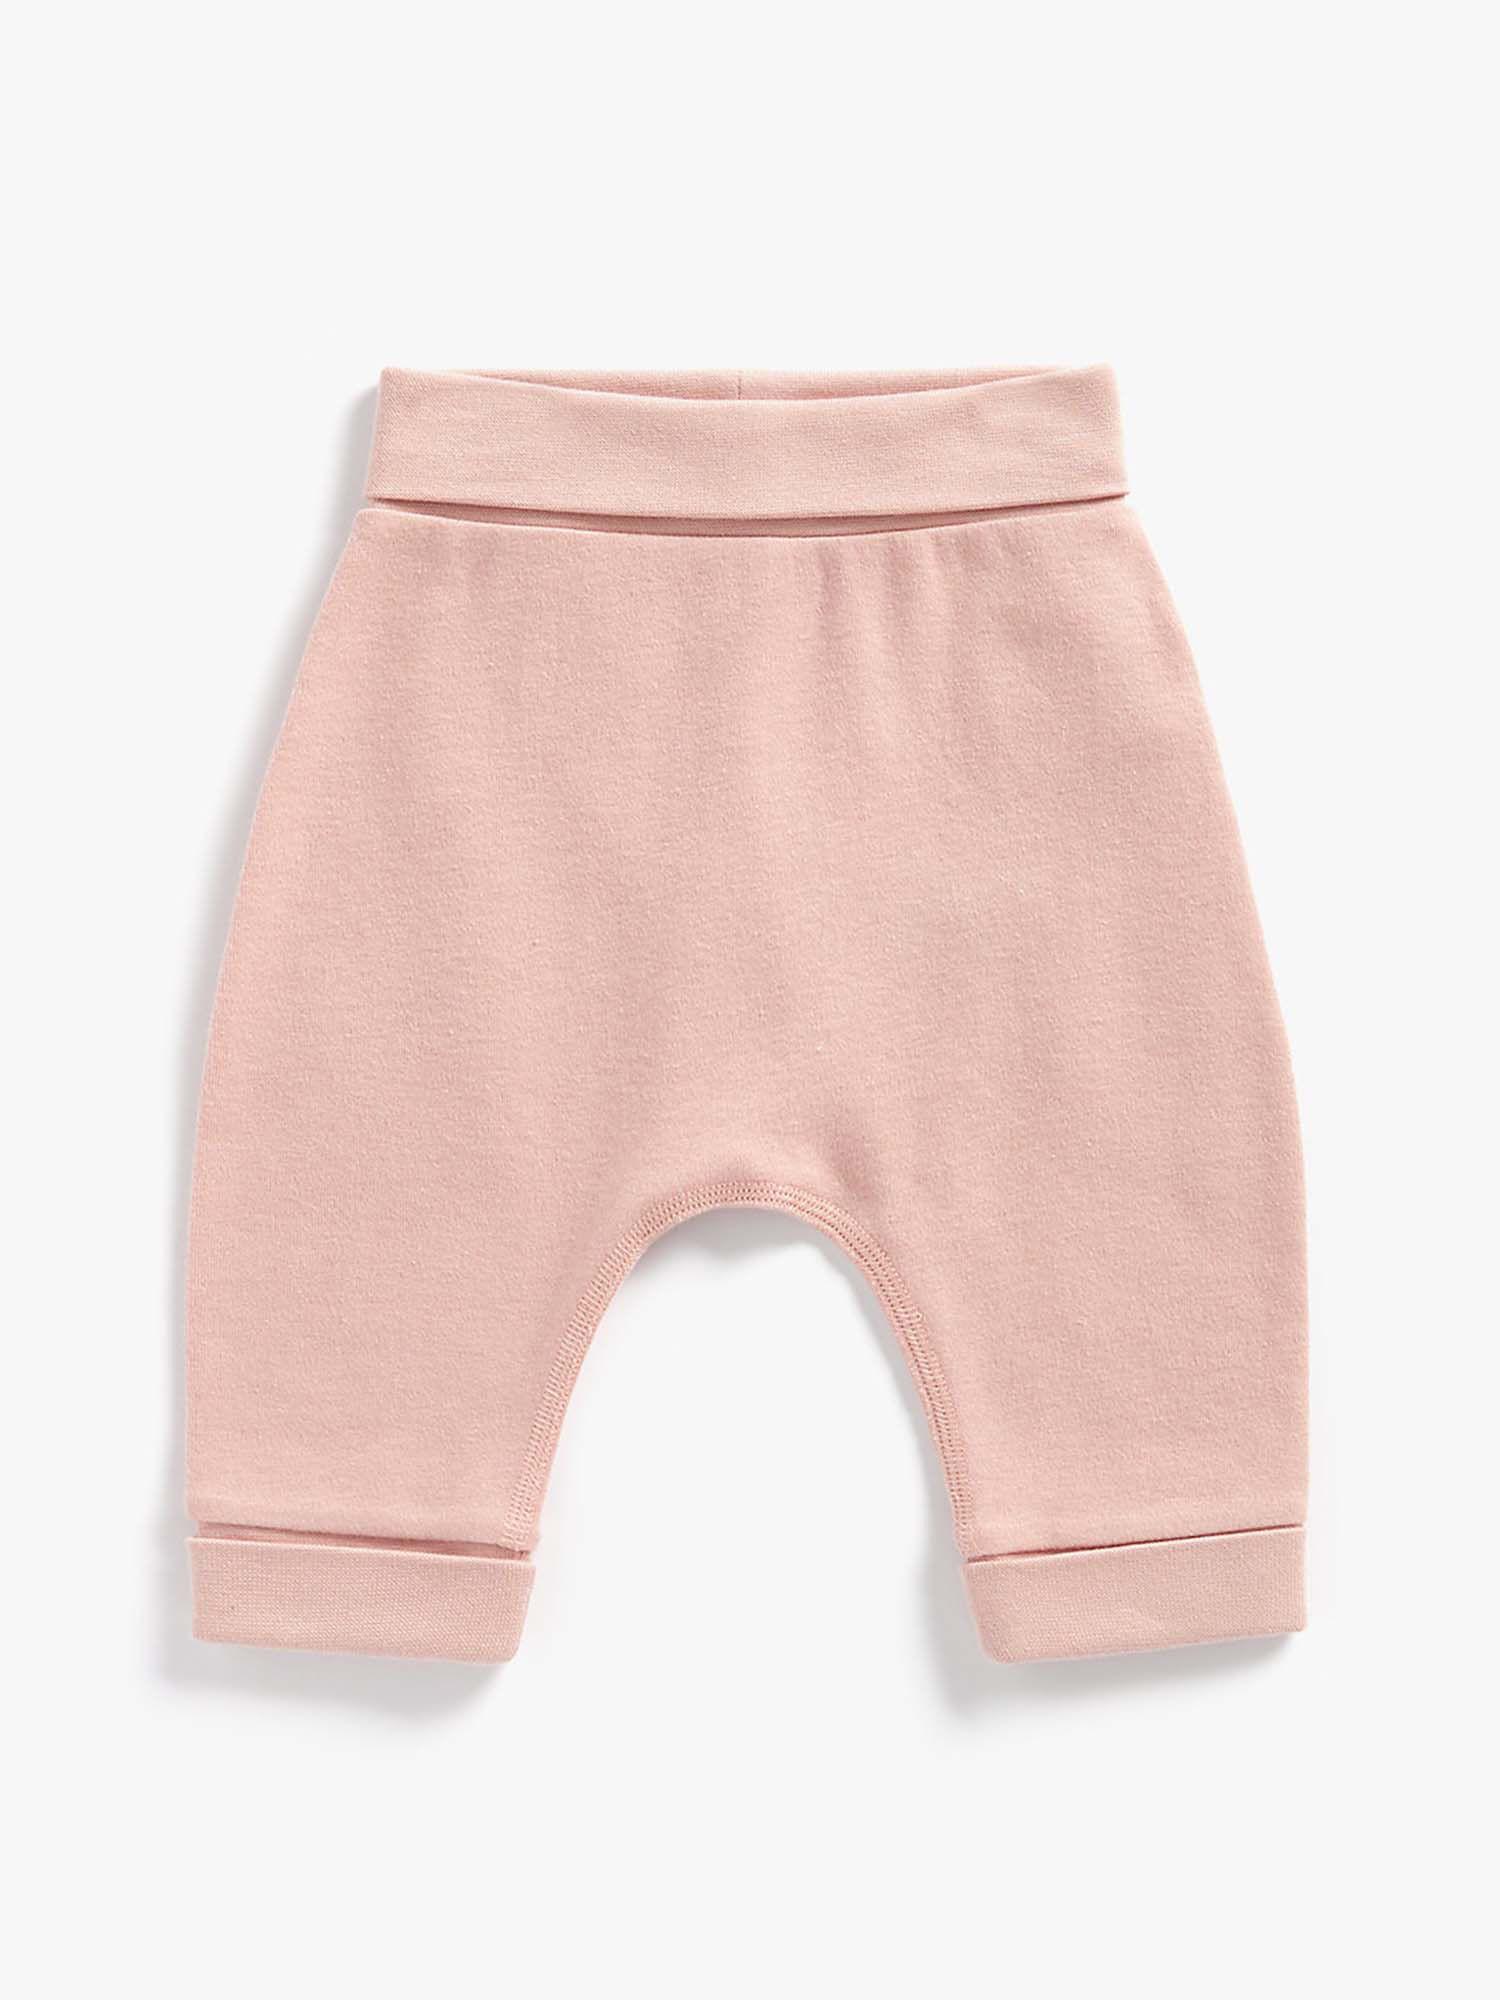 mother care pink solid jogger